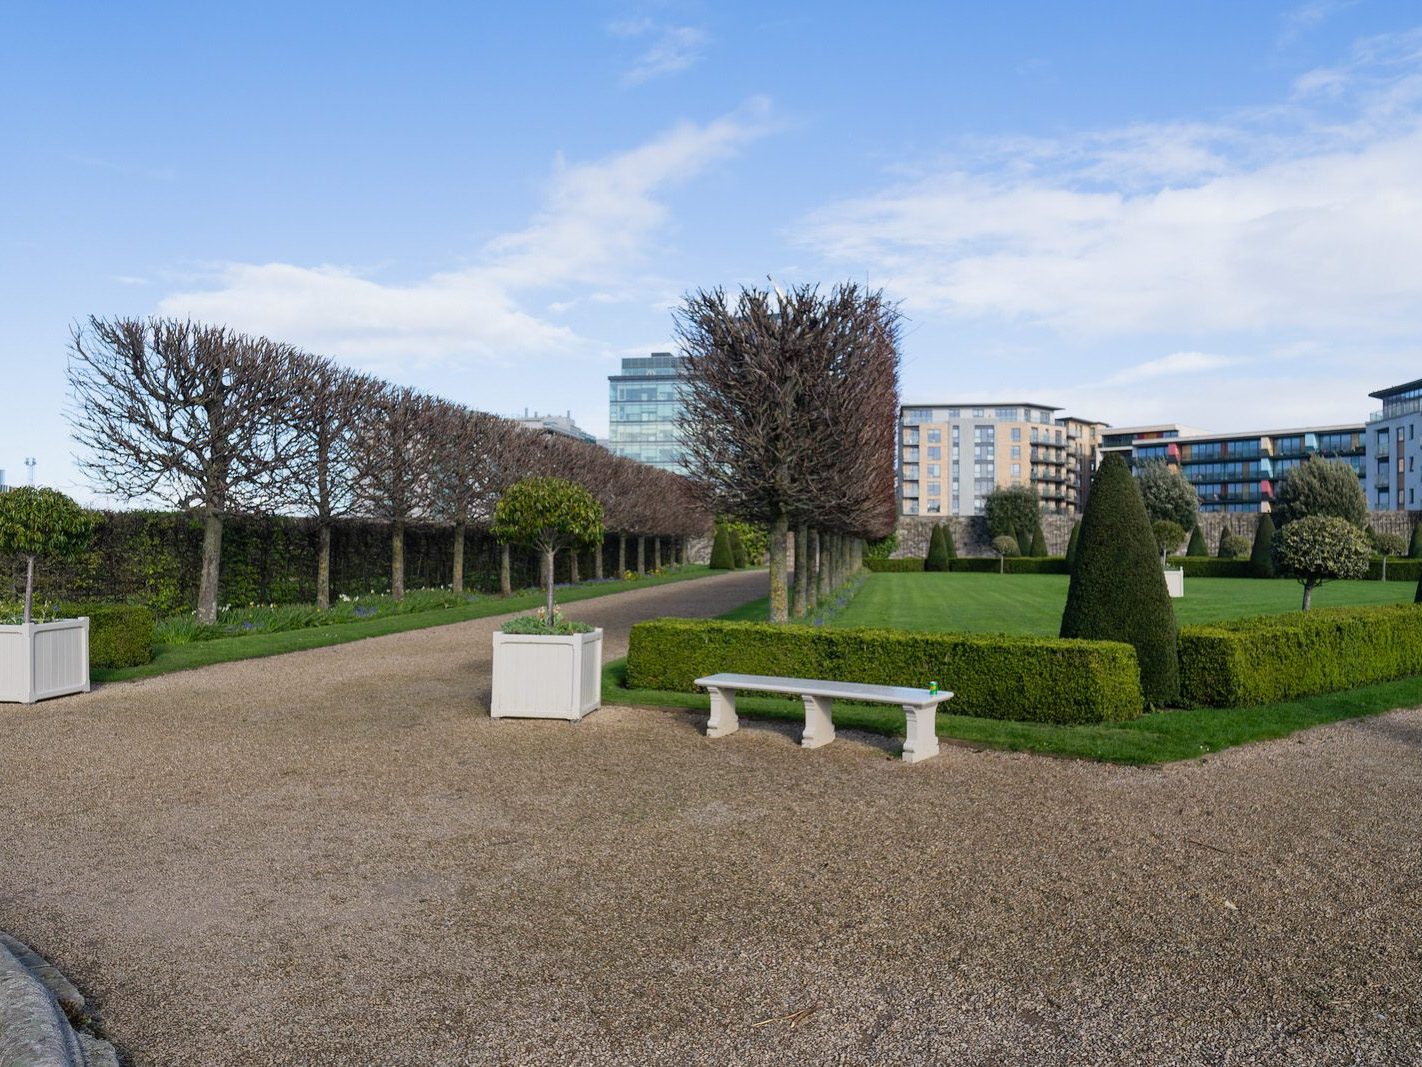 THE FORMAL GARDENS [AT THE IRISH MUSEUM FOR MODERN ART]-223154-1